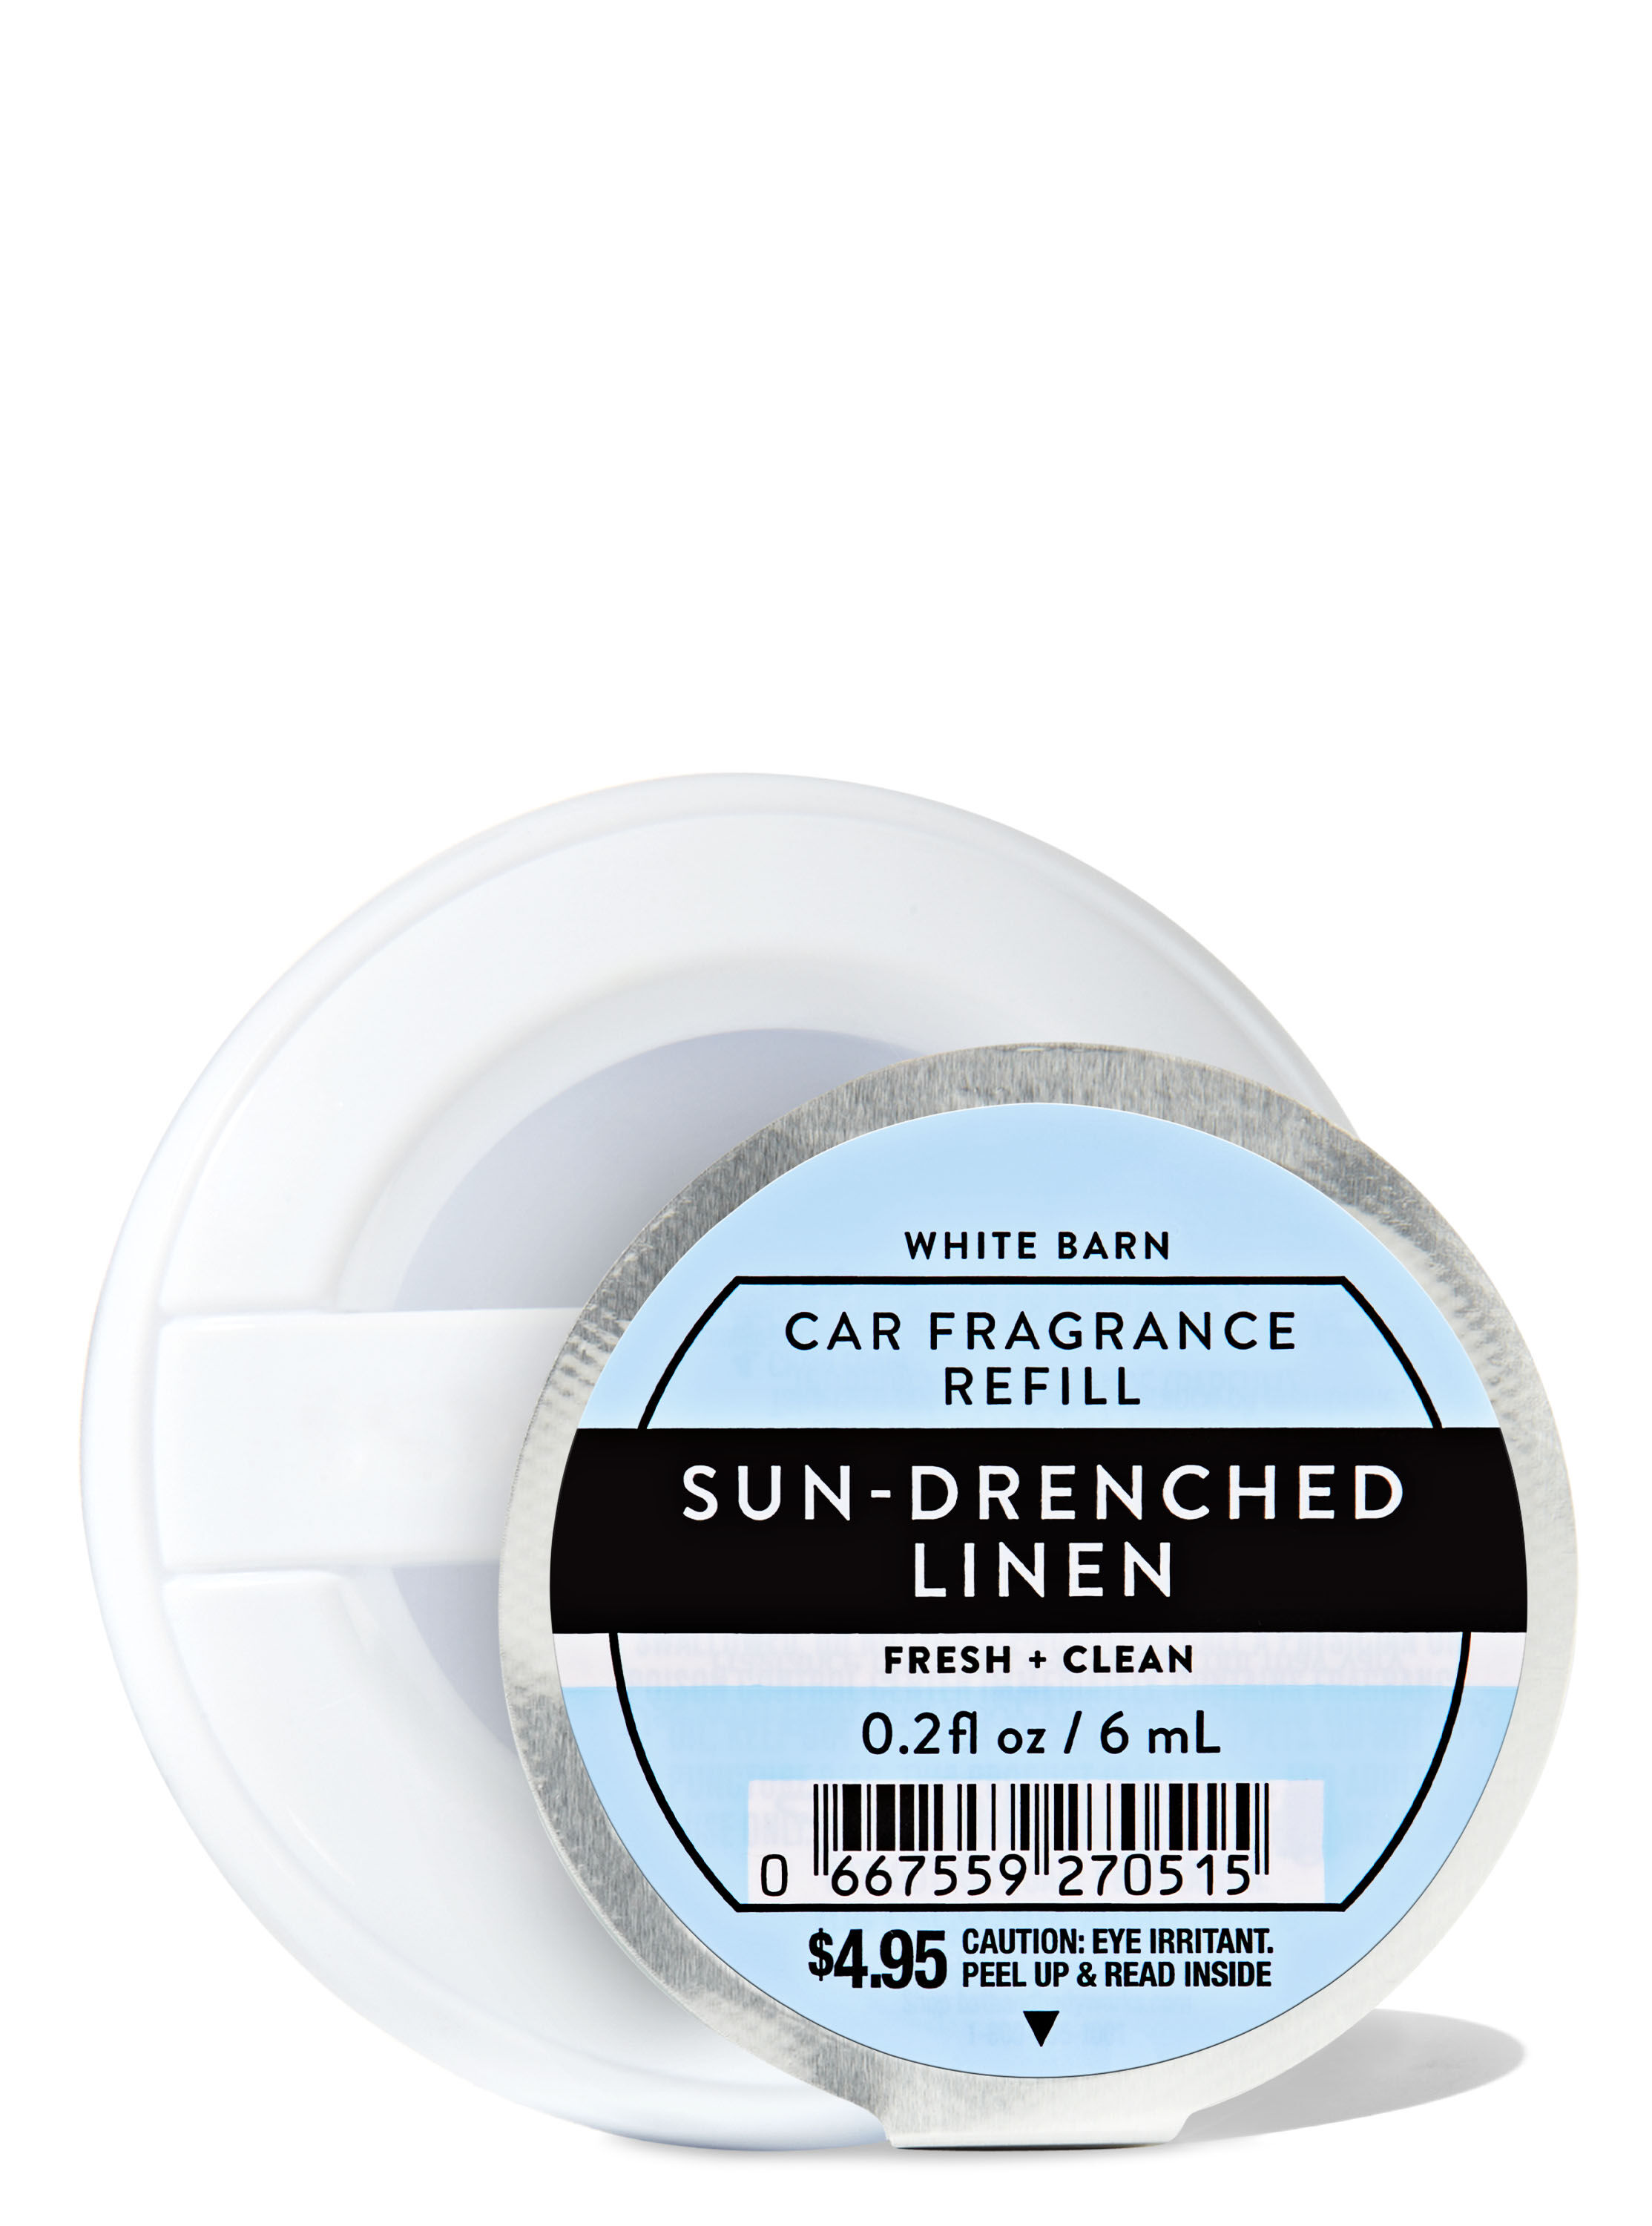 Sun-Drenched Linen Car Fragrance Refill